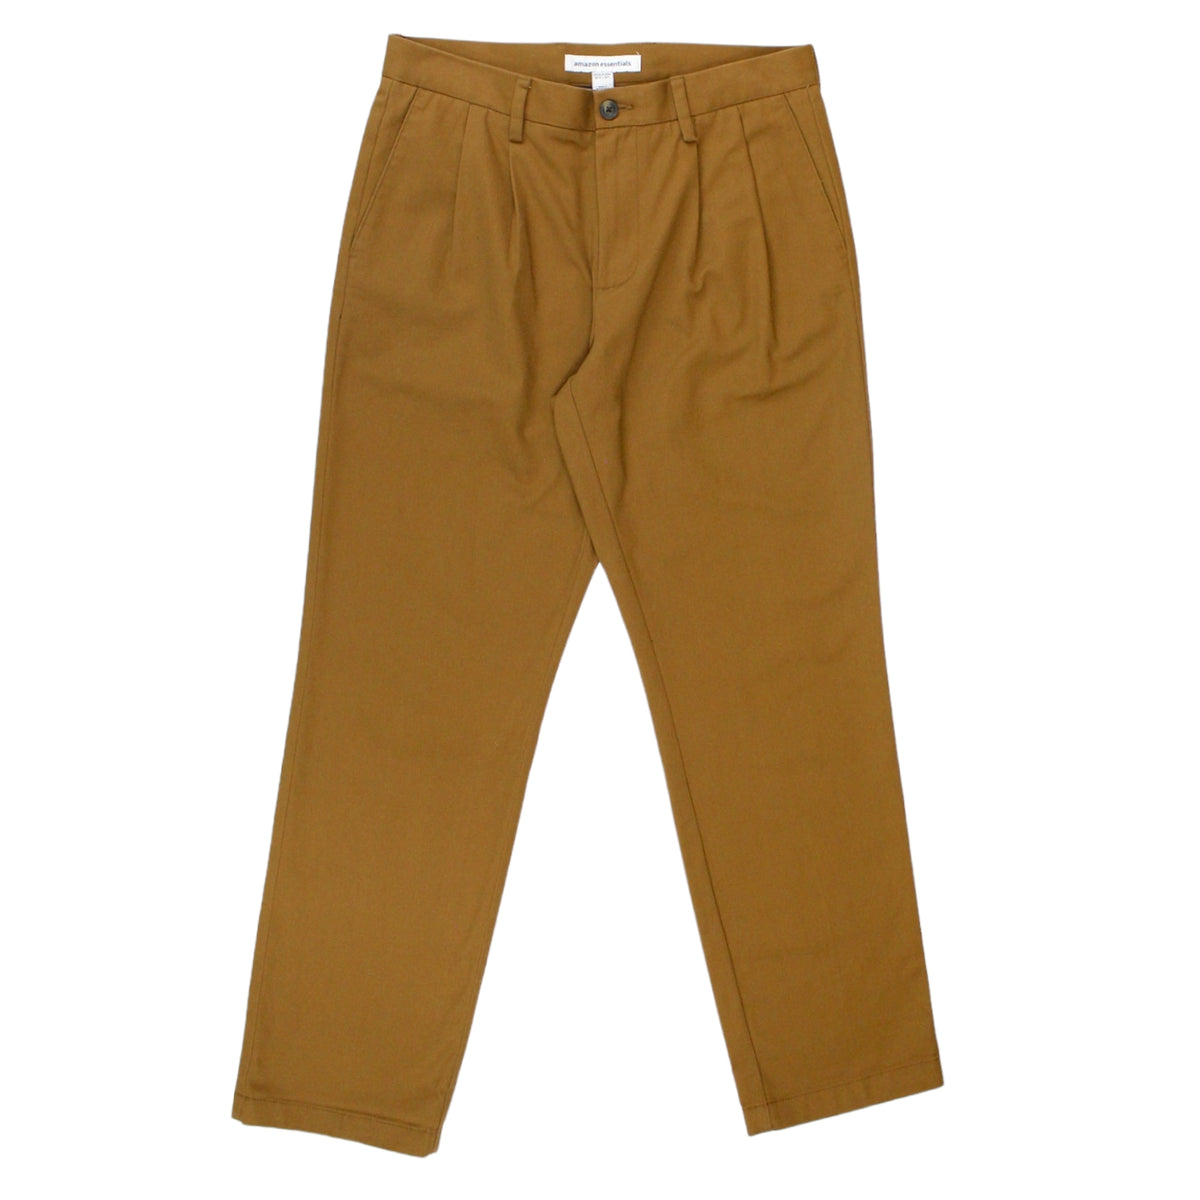 Amazon Essentials Brown Pleated Trousers